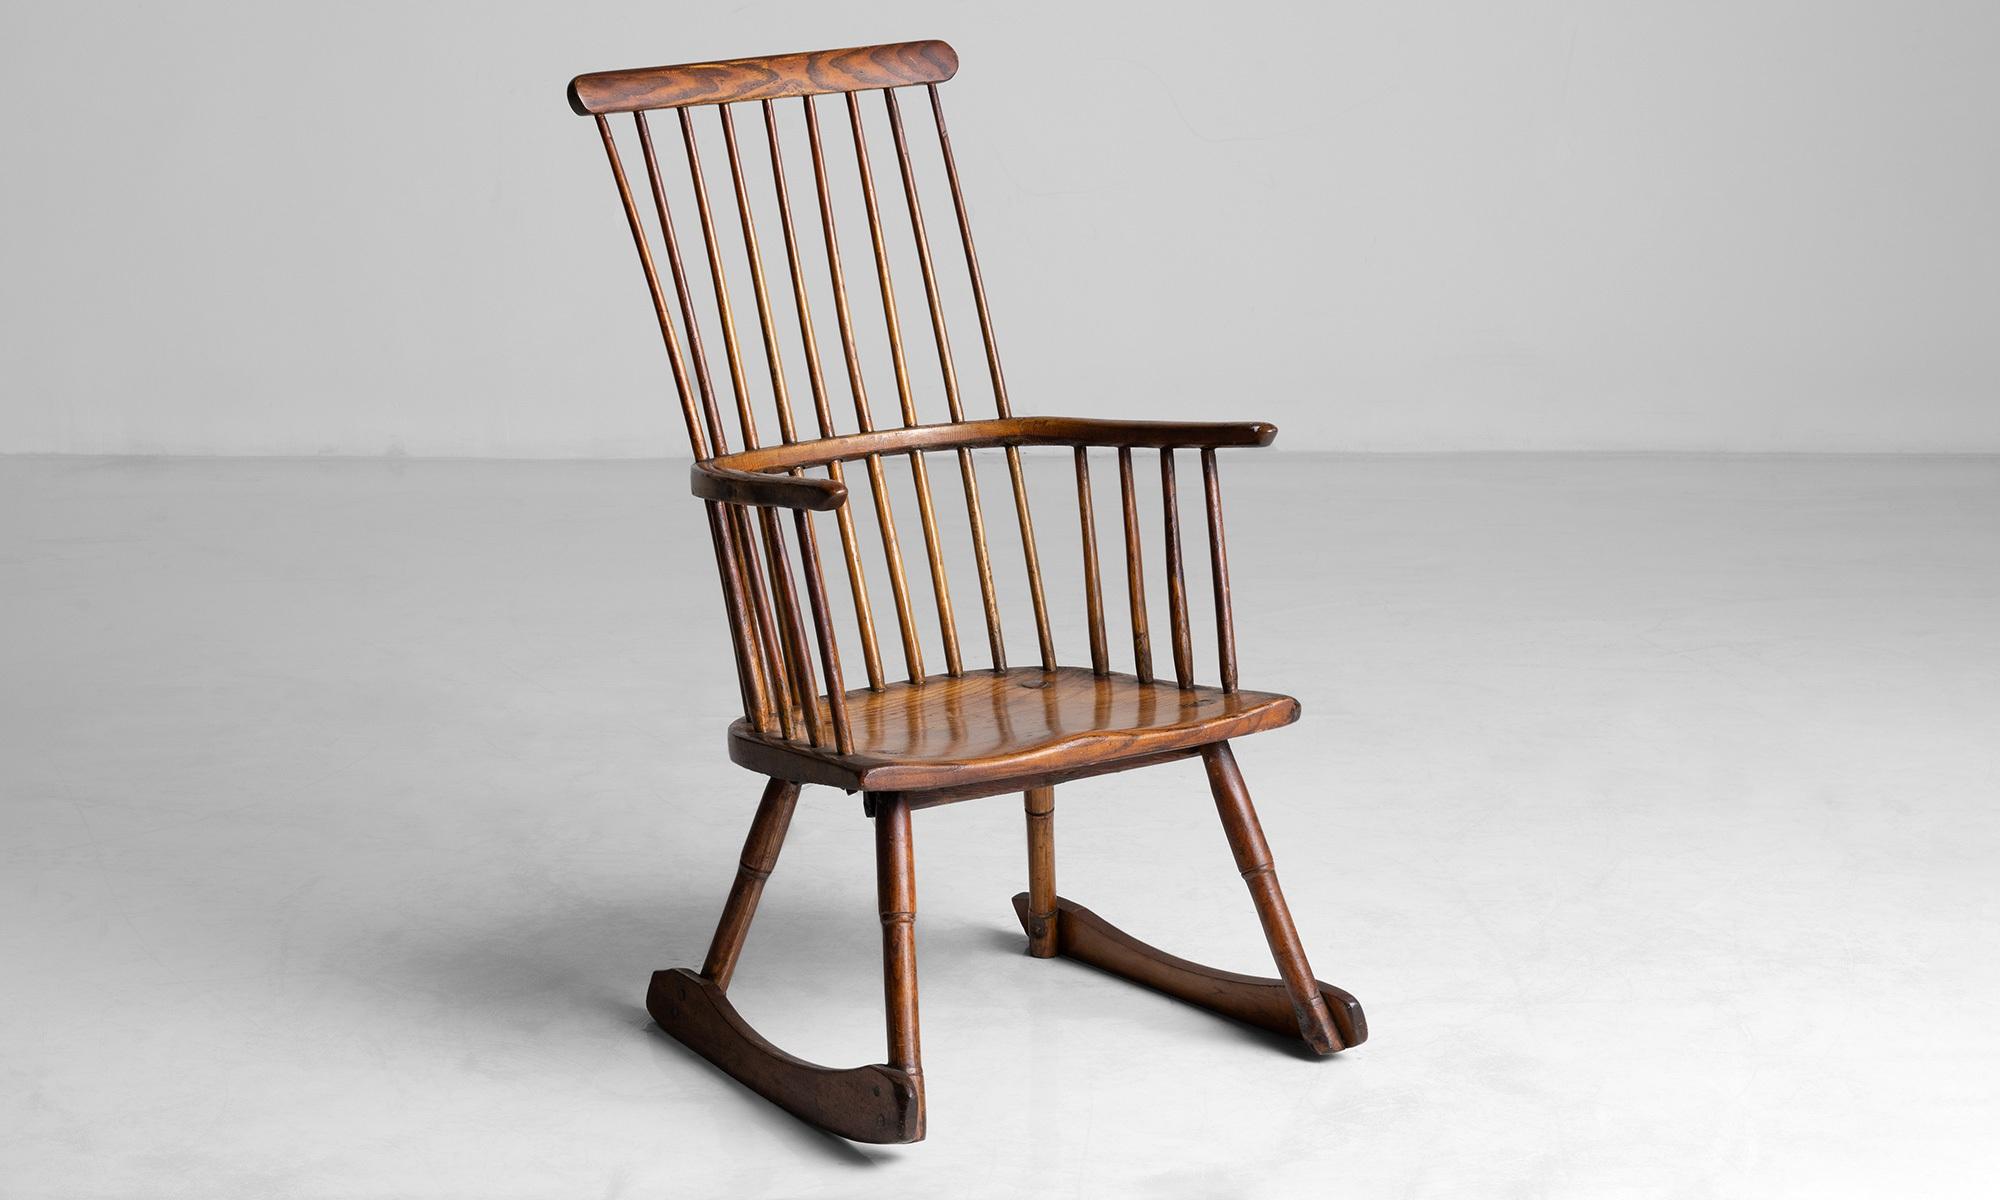 Windsor rocking chair.

England circa 1900.

Spindle back rocking chair in original finish.

Measures: 23.25”L x 23”D x 41.25”H.